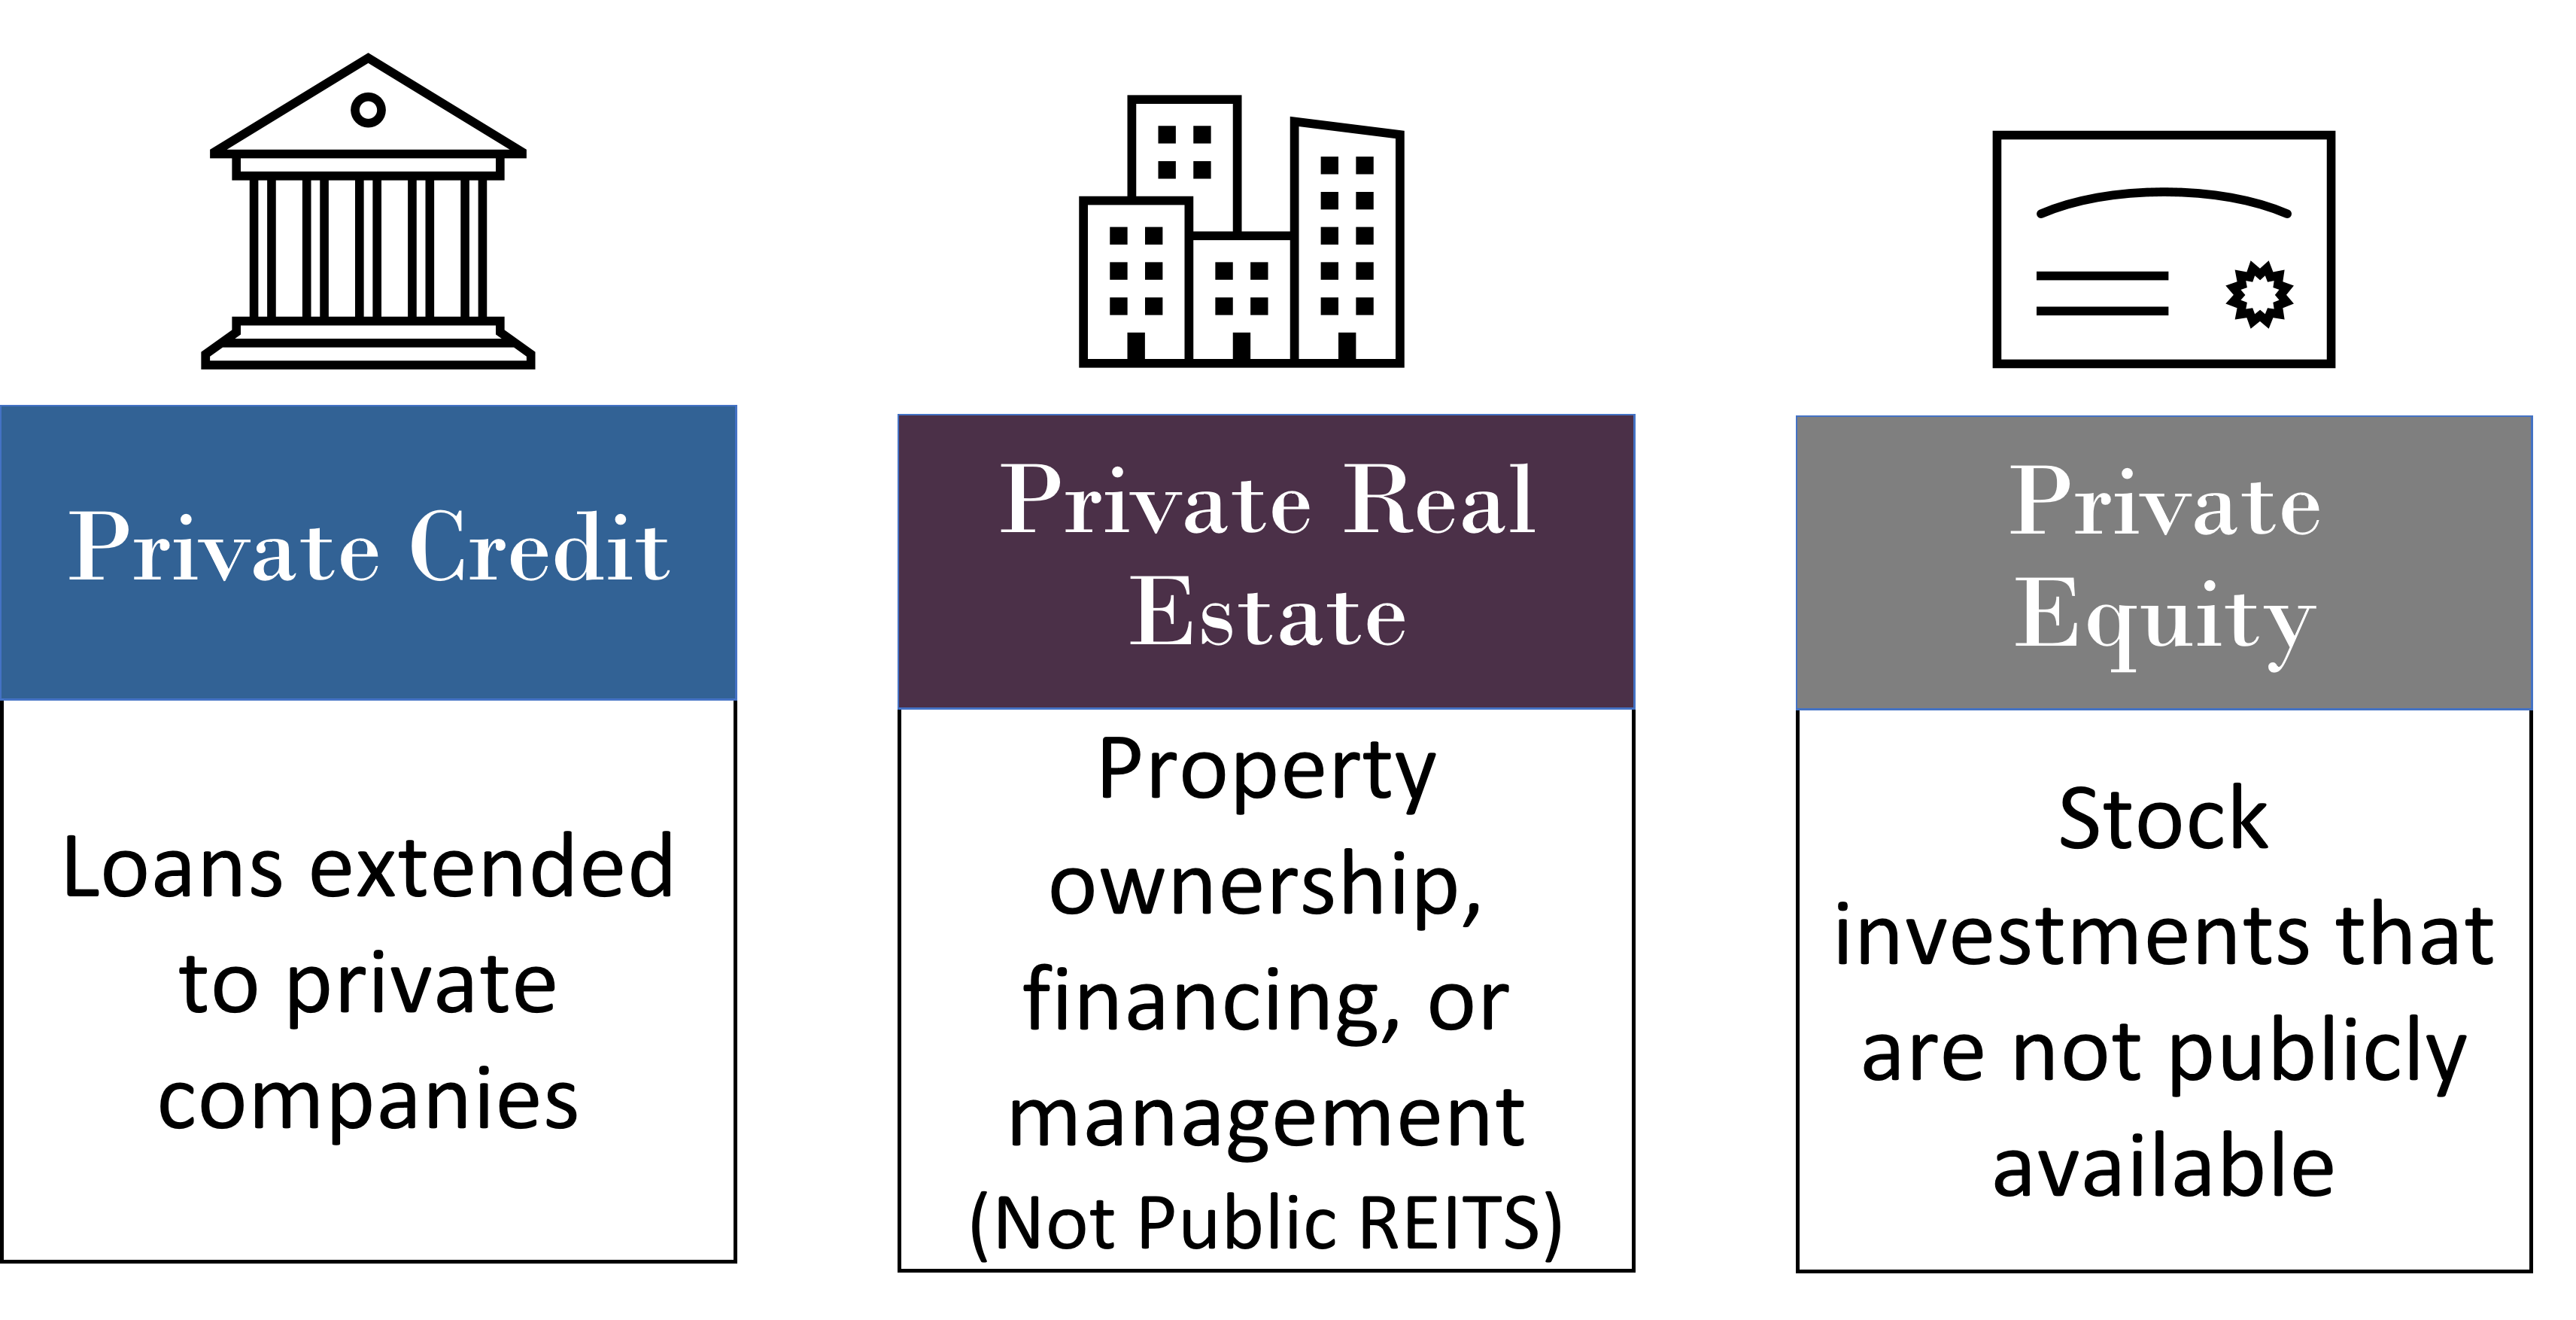 An Overview of Investing in Private Equity, Credit, and Real Estate